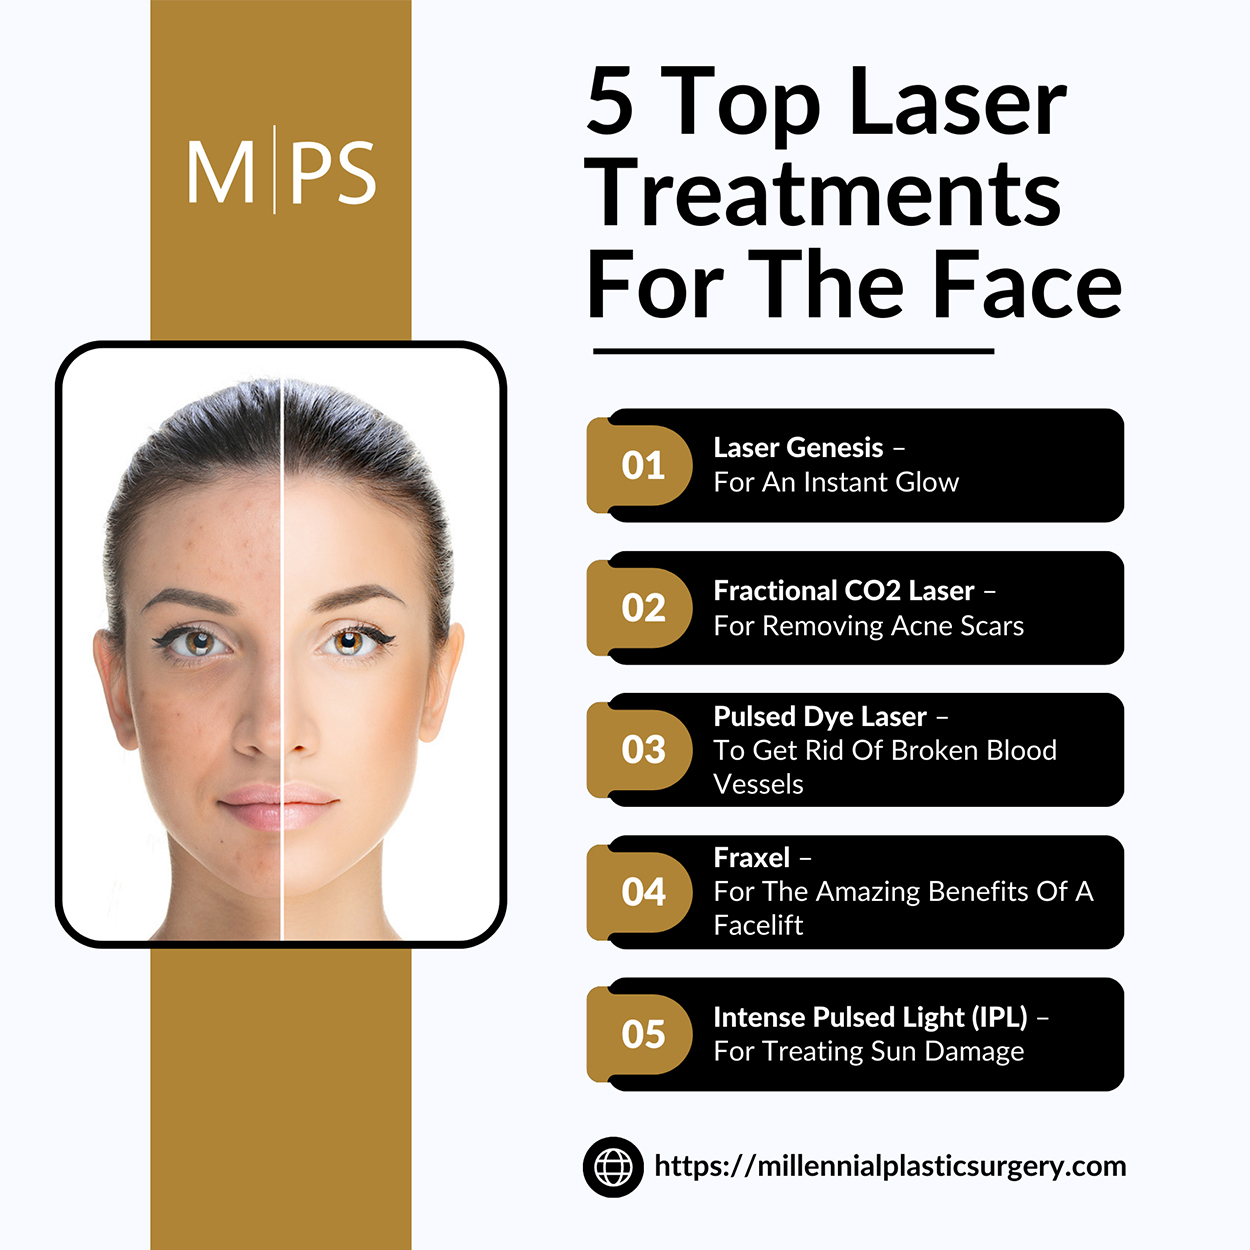 5-top-laser-treatments-for-the-face-millennial-plastic-surgery banner